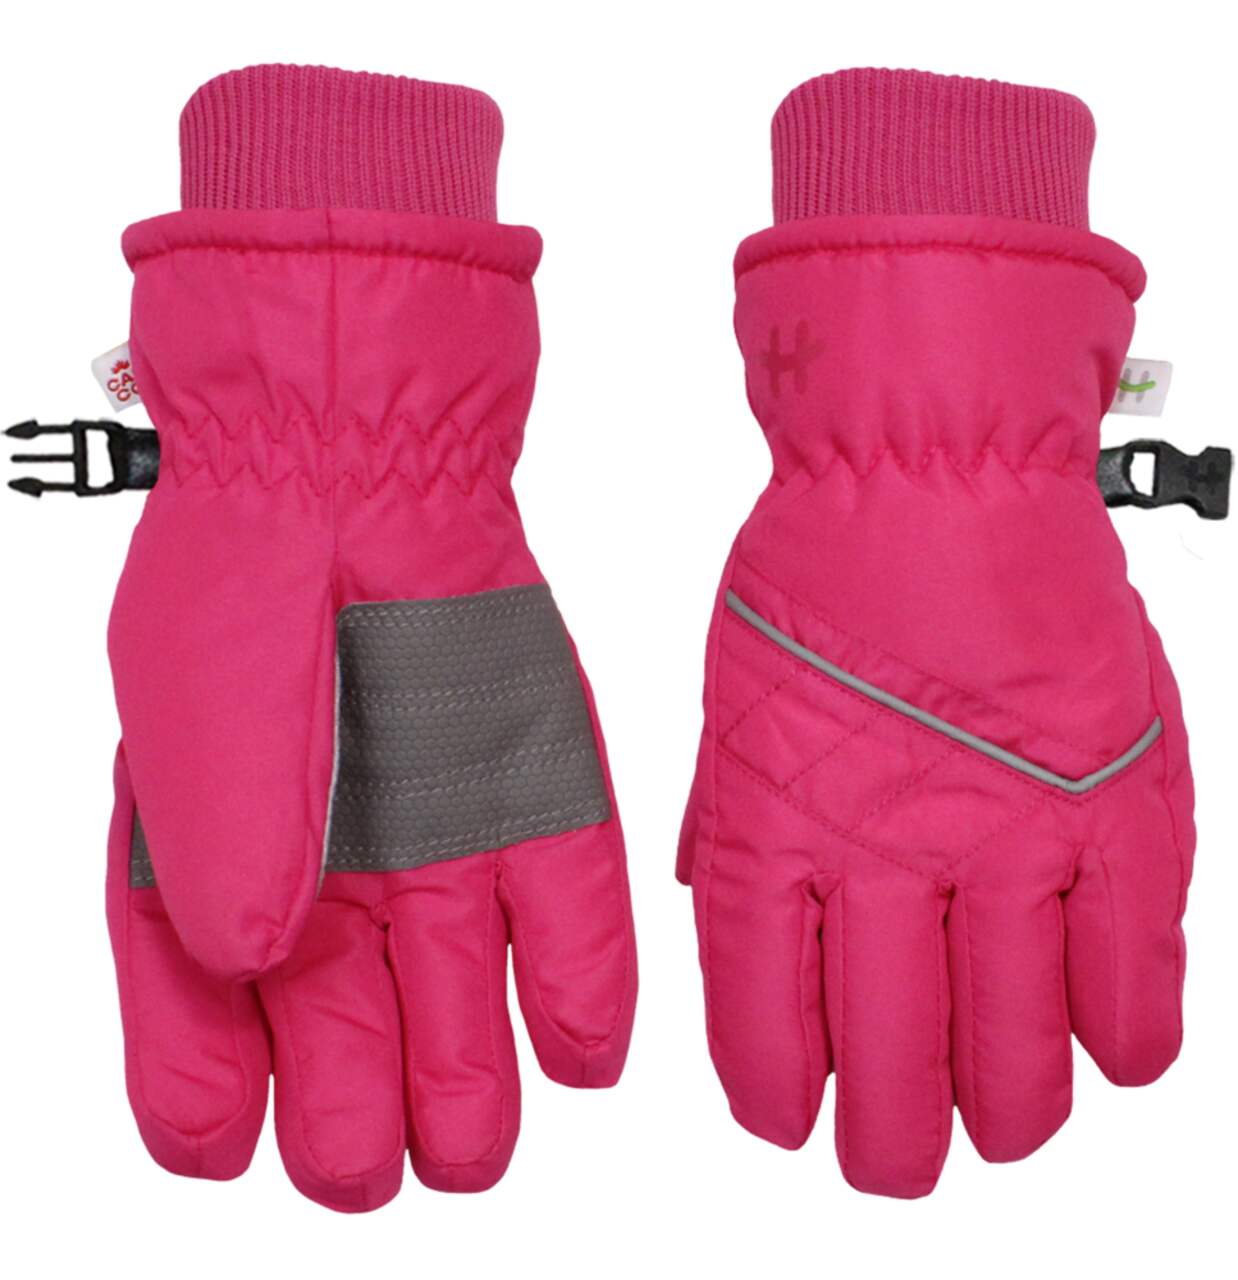 Hot Paws Kids Thermal Insulated Winter Ski Snowboard Gloves